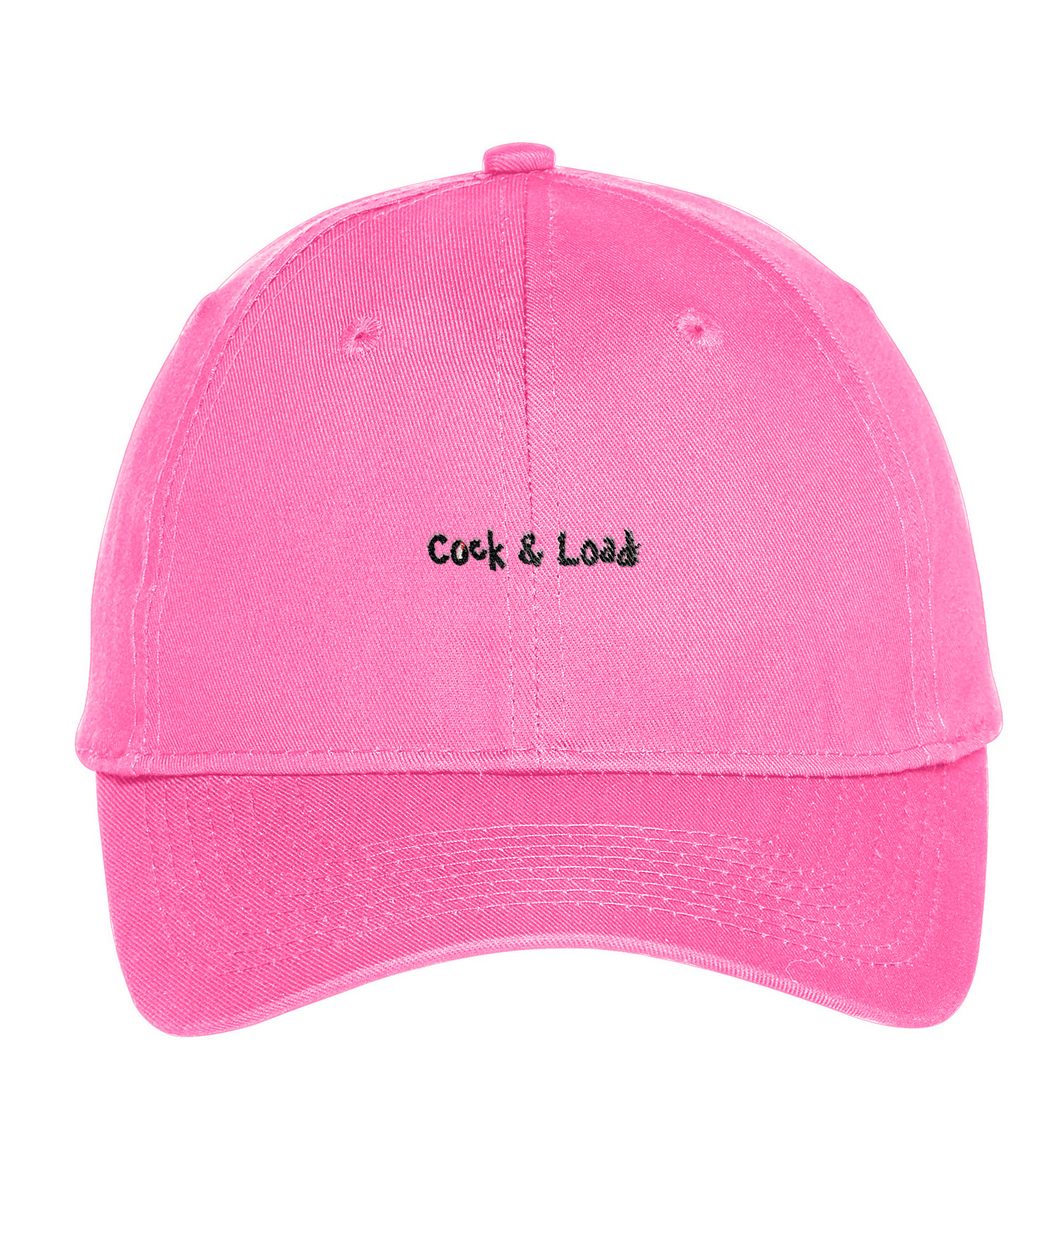 Cock n load Embroidered Twill Cap or Similar